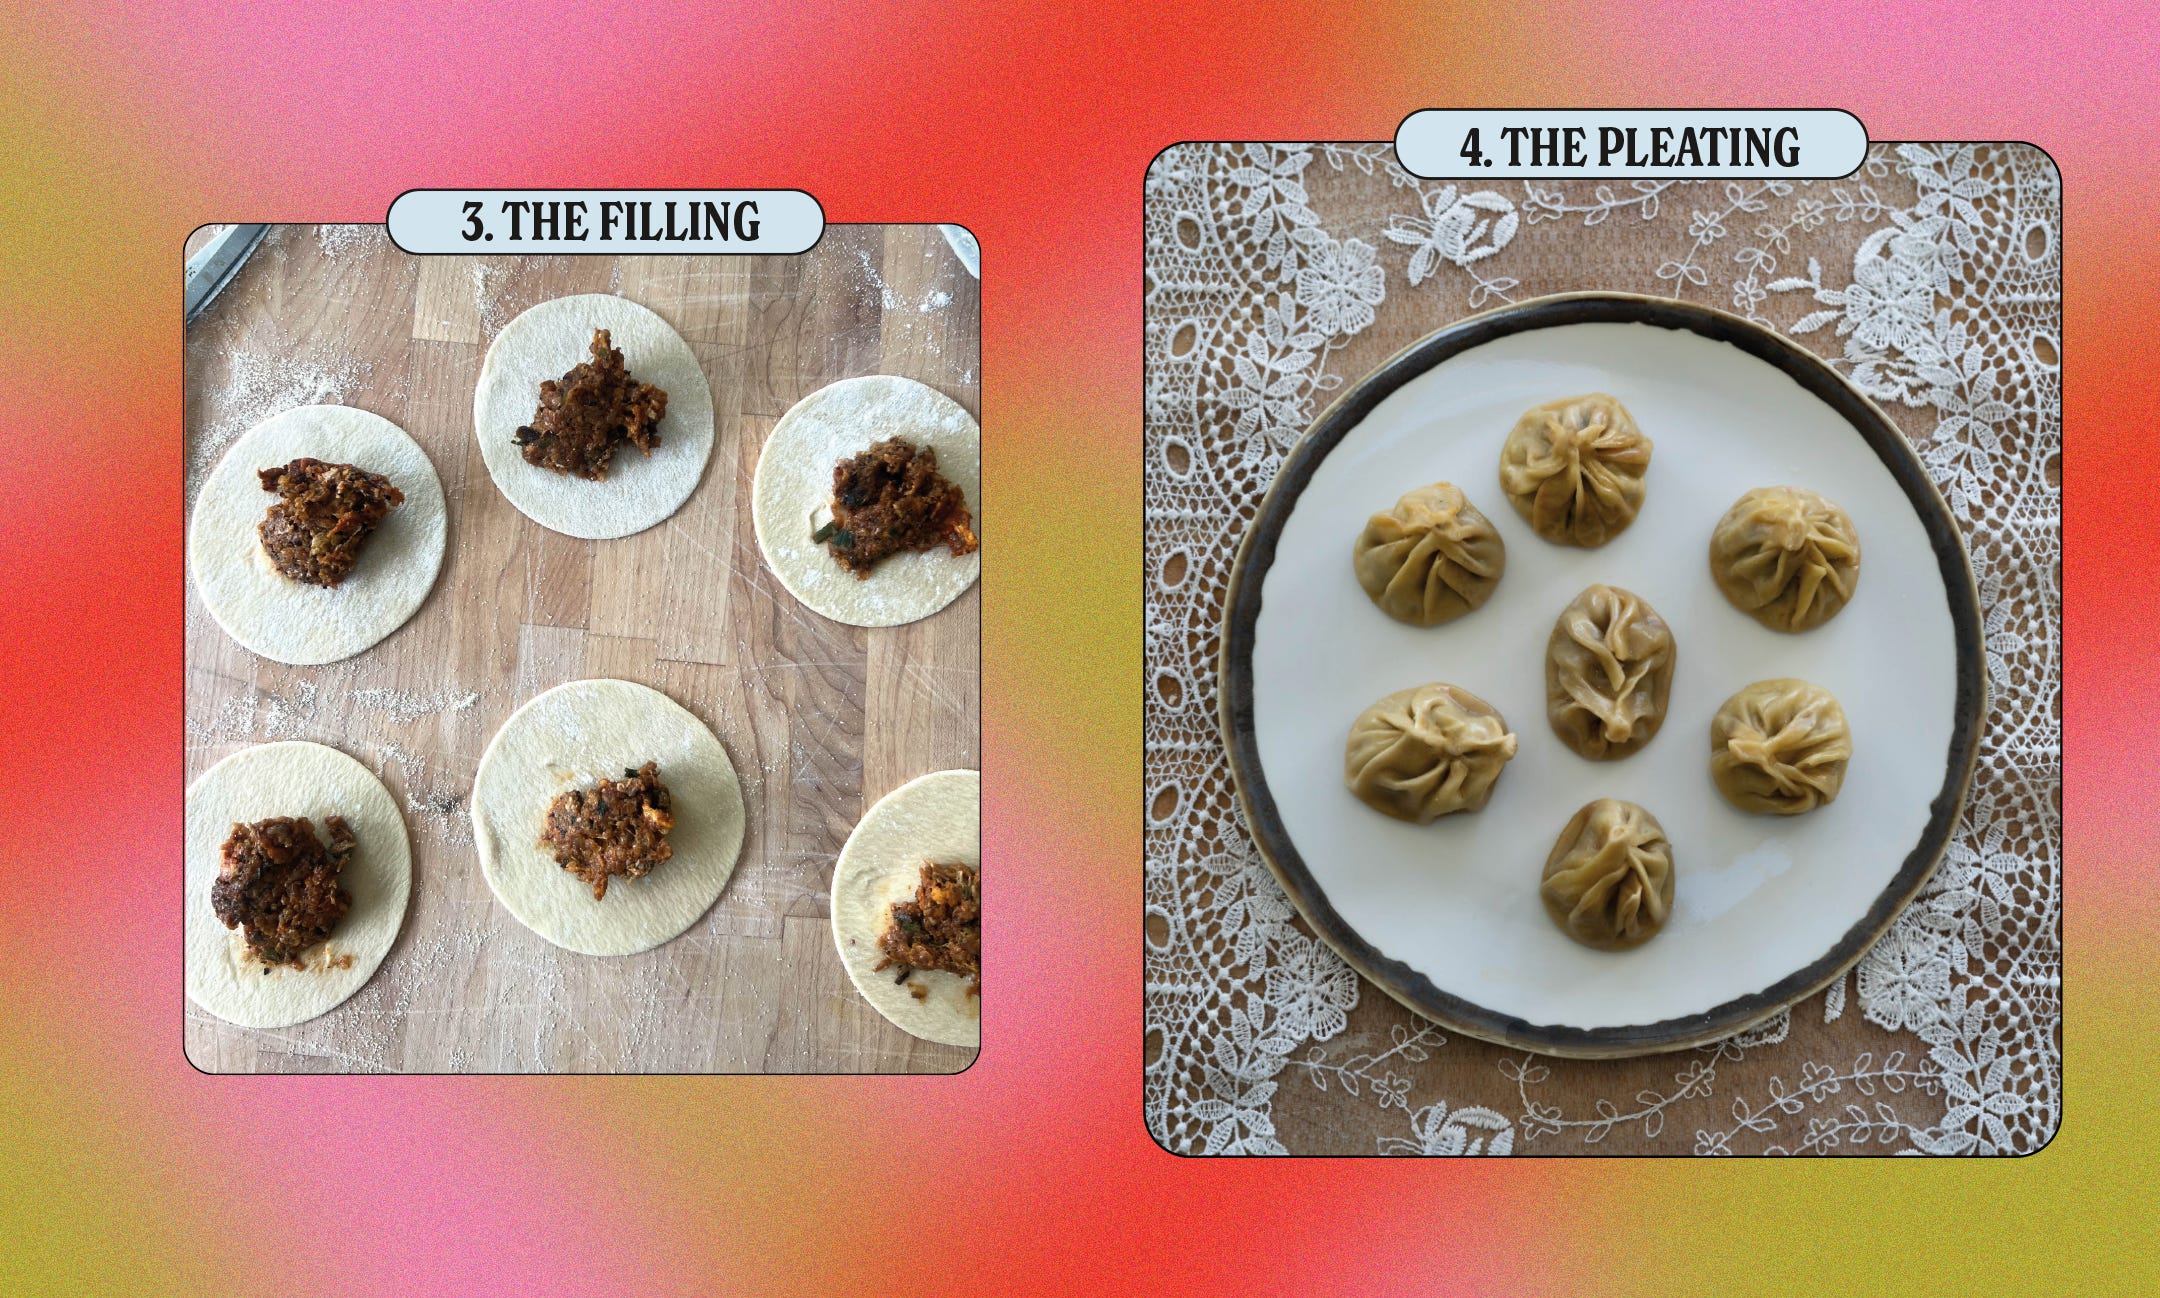 at left, a photo of dumpling filling on top of dough that's not yet pleated; on the right, a plate of plain steamed khinkali 